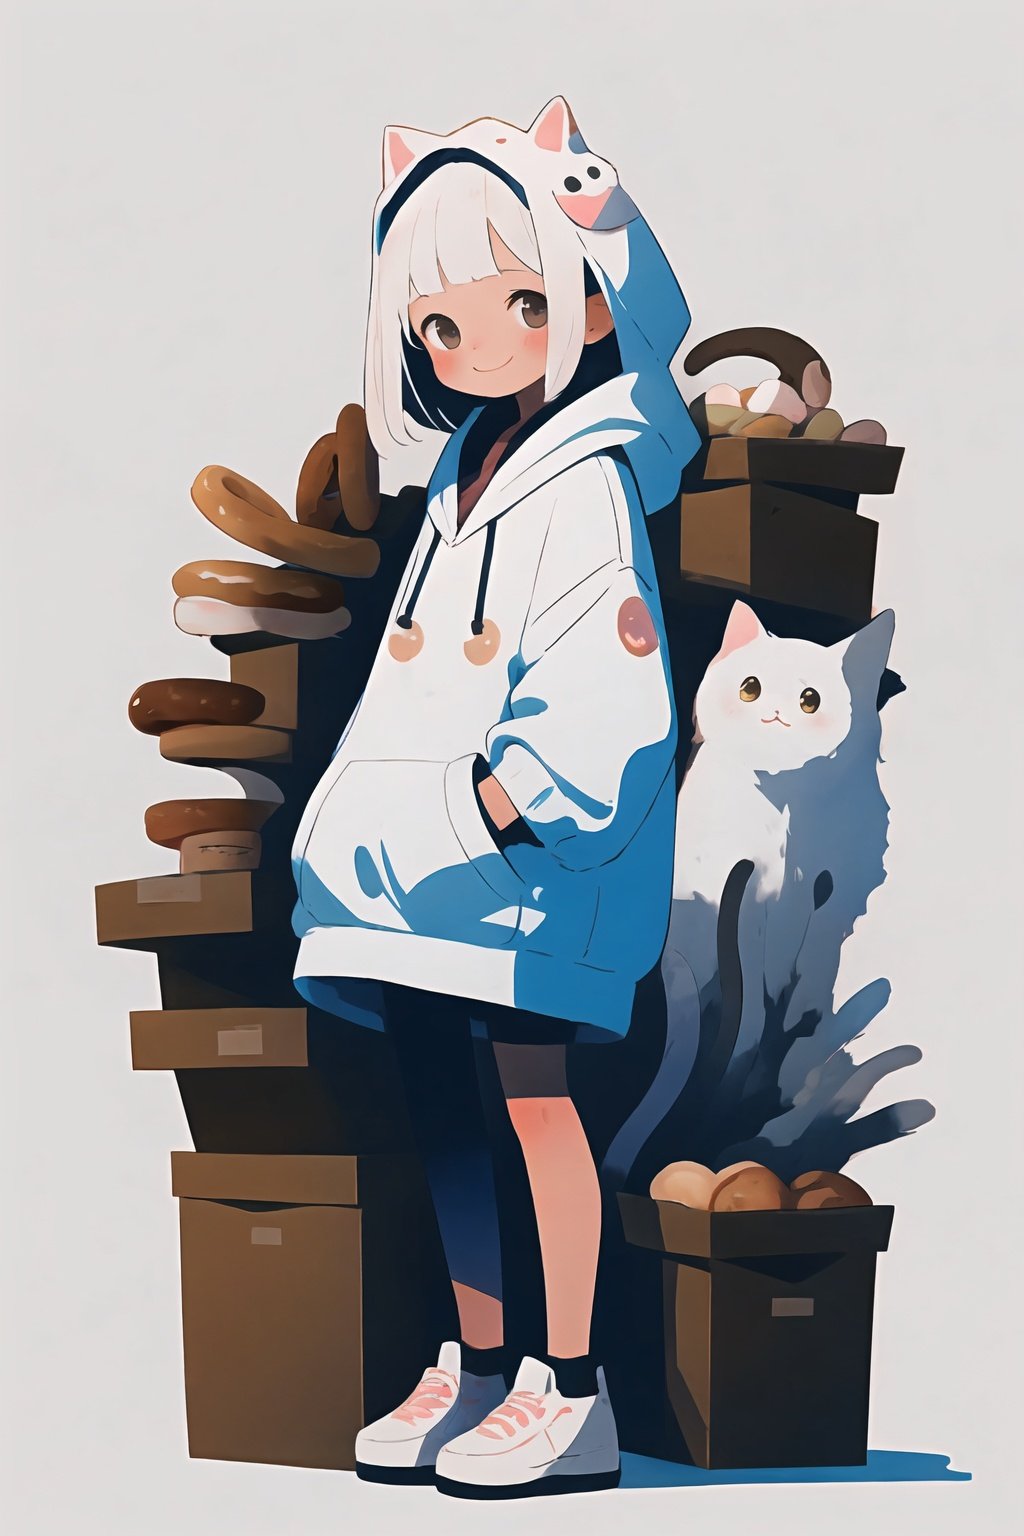 style of Enki Bilal, adorable, happy, a girl, white hair, puffy hoody, donuts, many cats, full body, pastel colors, simple white background, in donuts, Illustration, cover art, japan, blur, shiny,minimalistic,simplecats